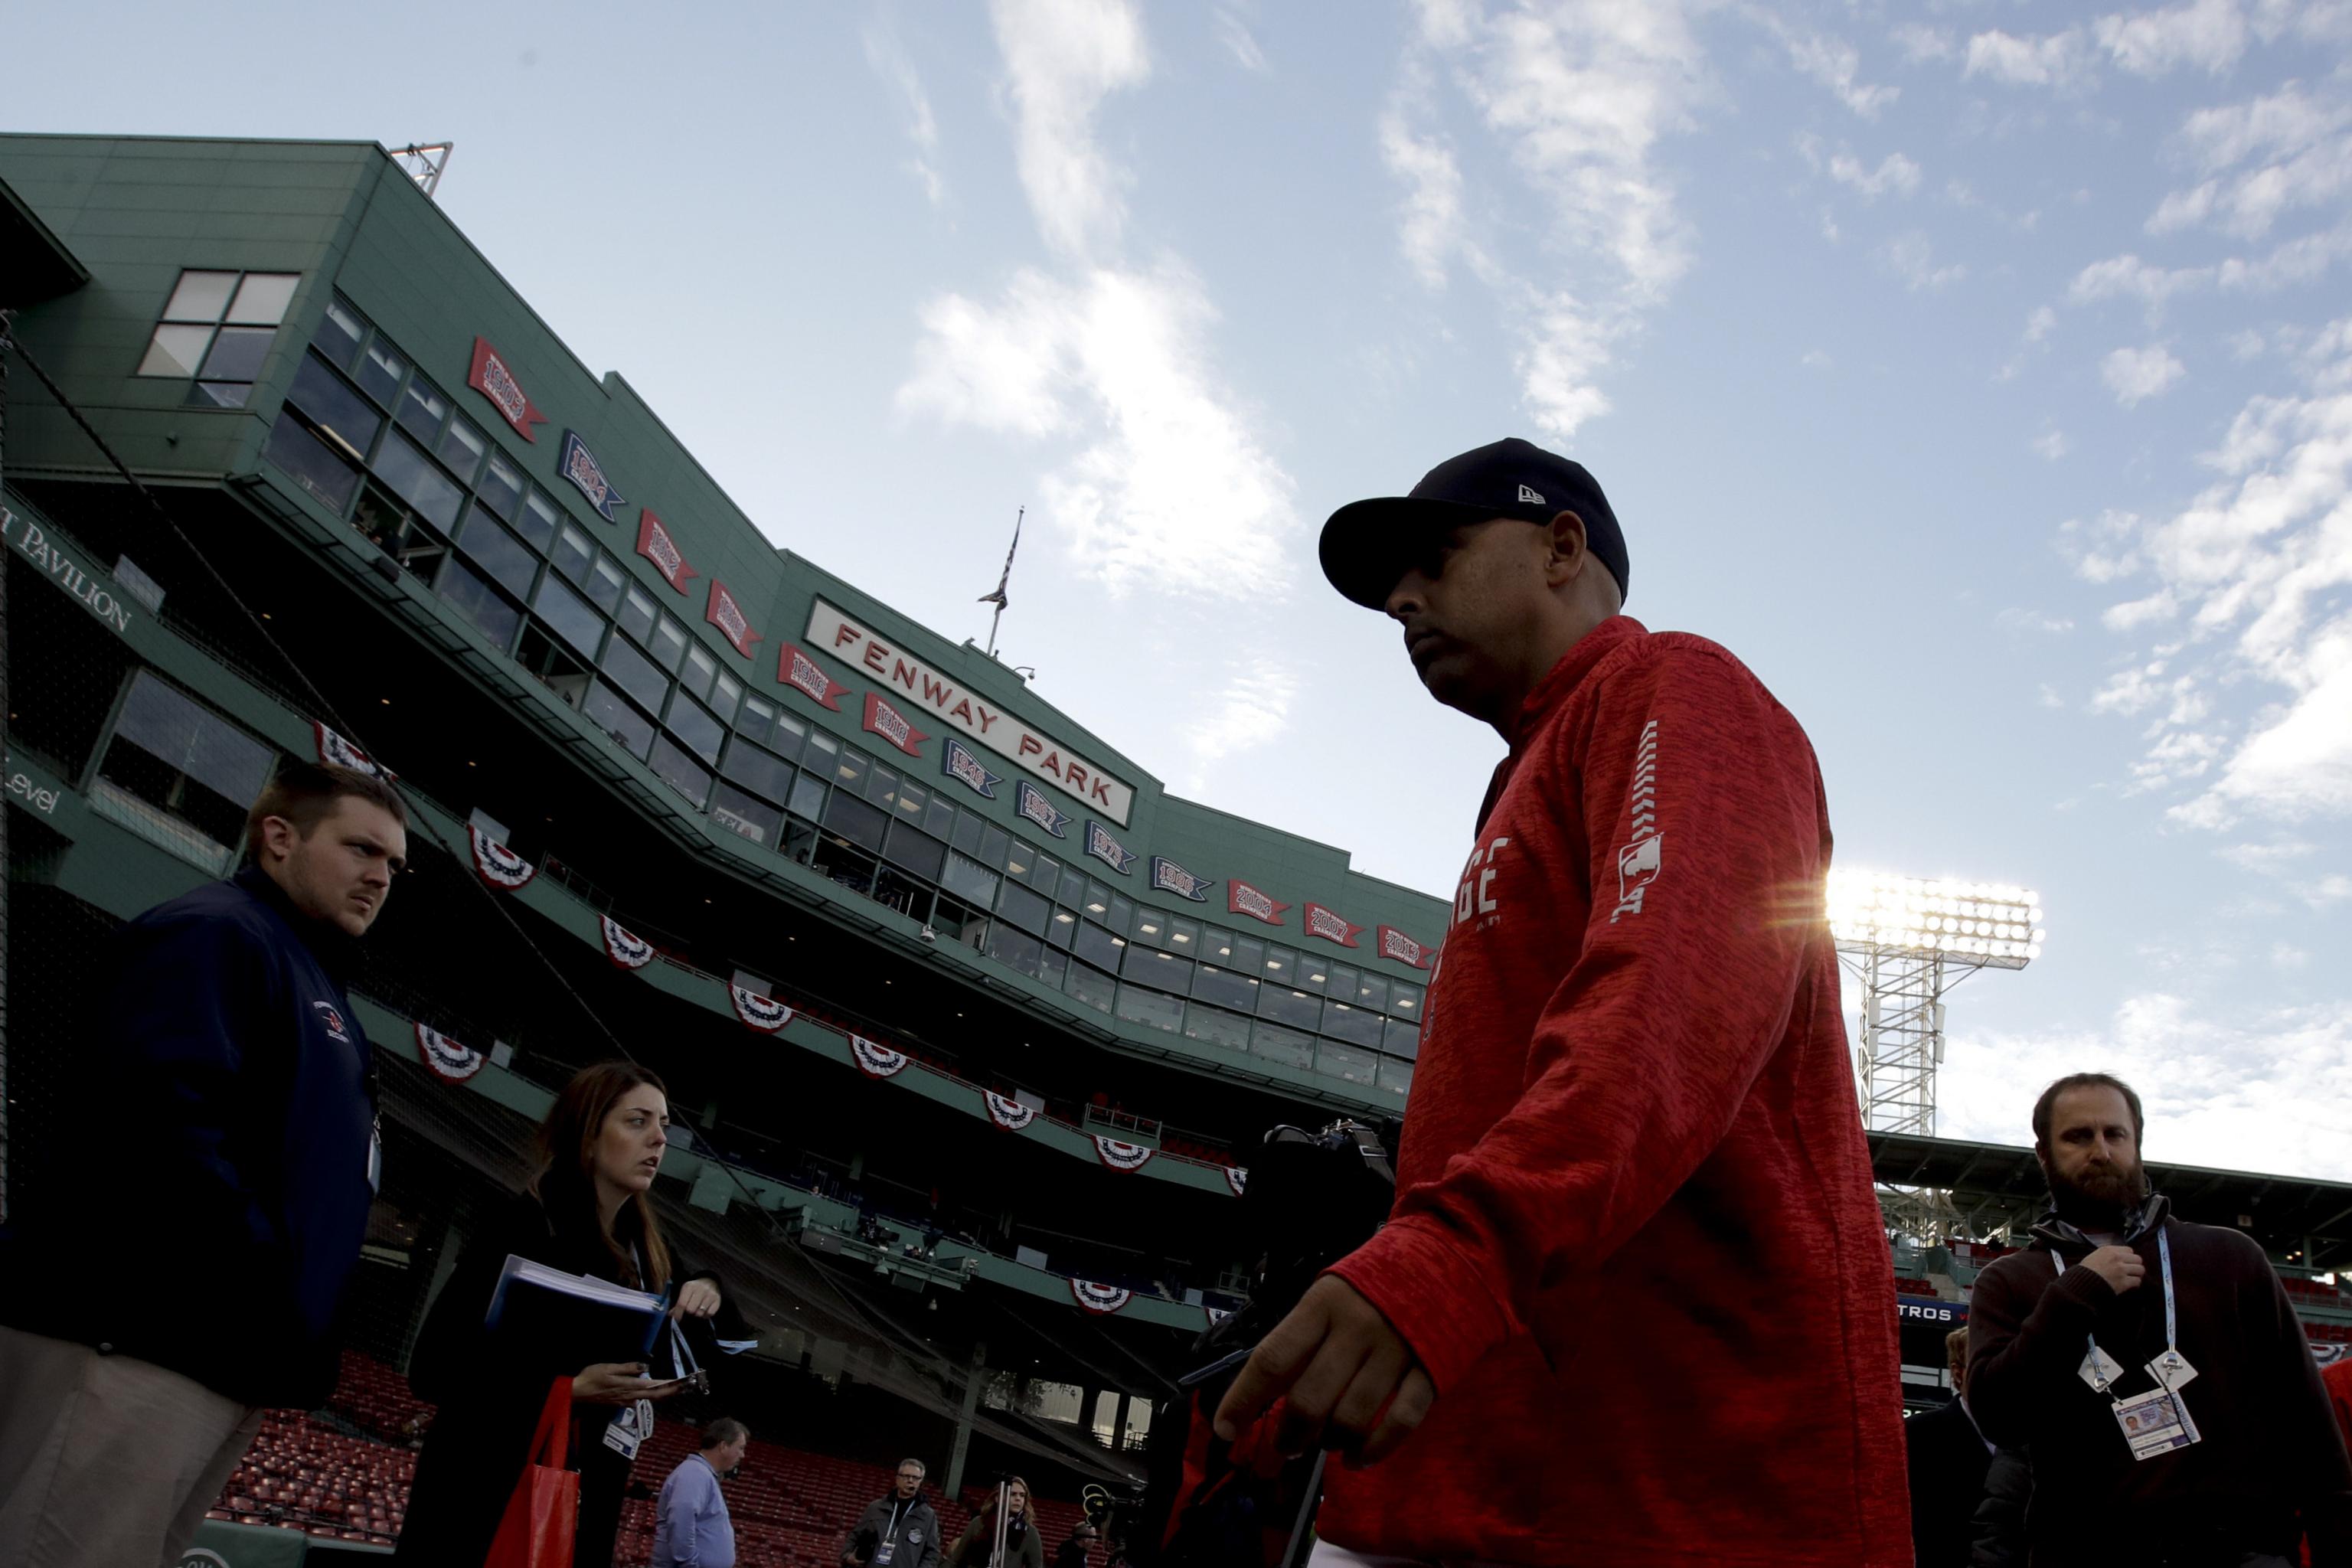 Red Sox part ways with Alex Cora, who was integral in Astros sign-stealing  scheme